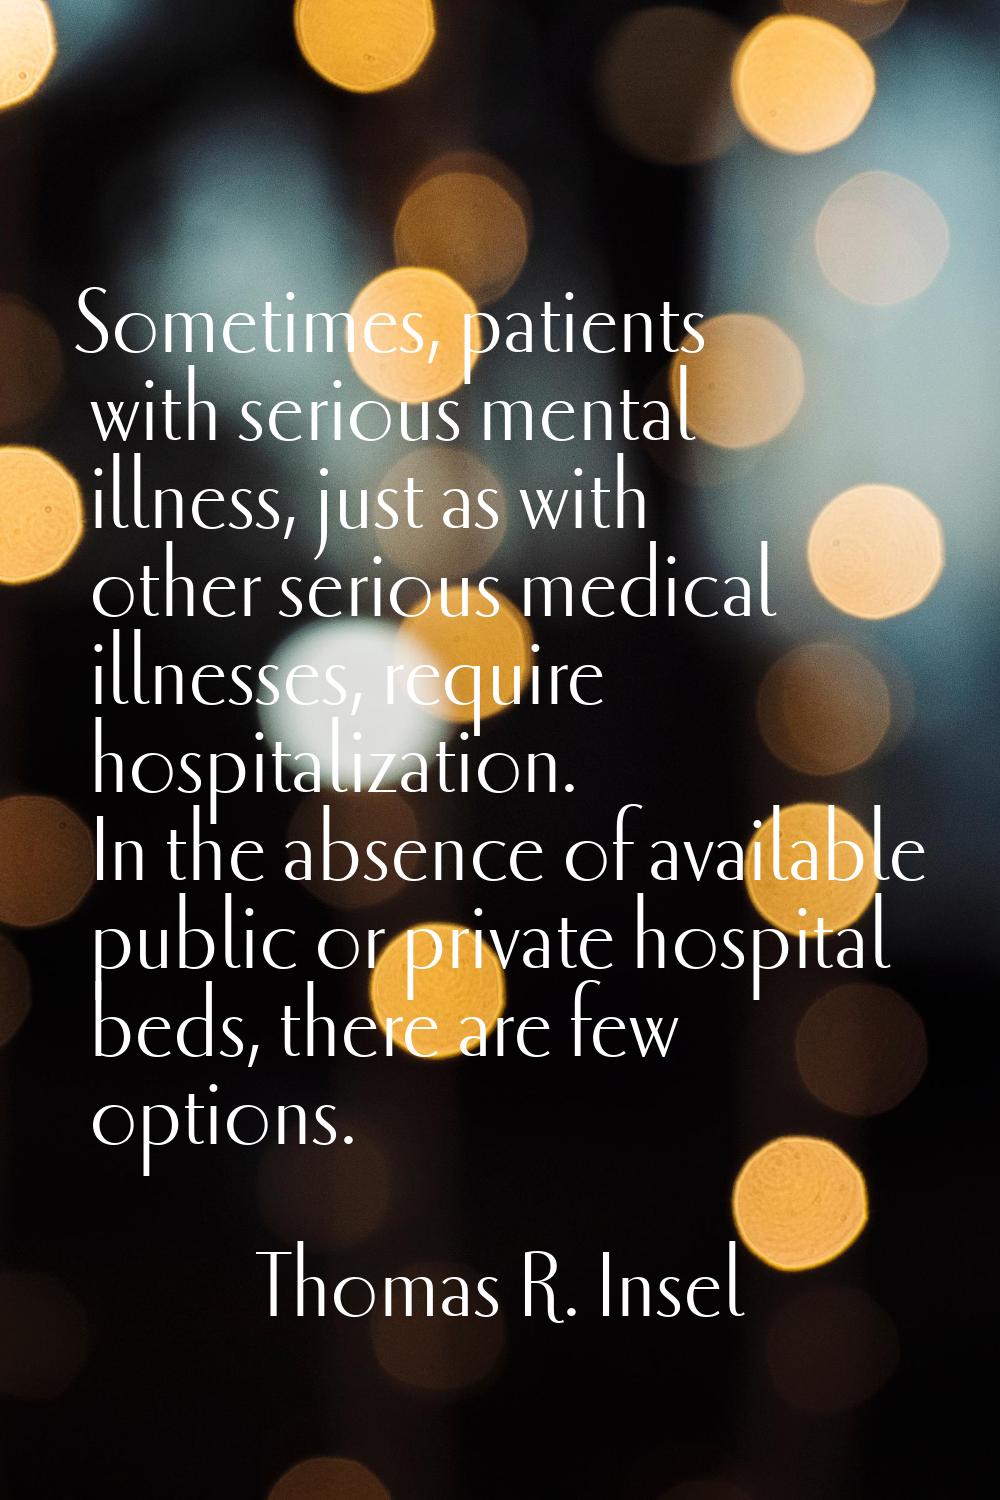 Sometimes, patients with serious mental illness, just as with other serious medical illnesses, requ